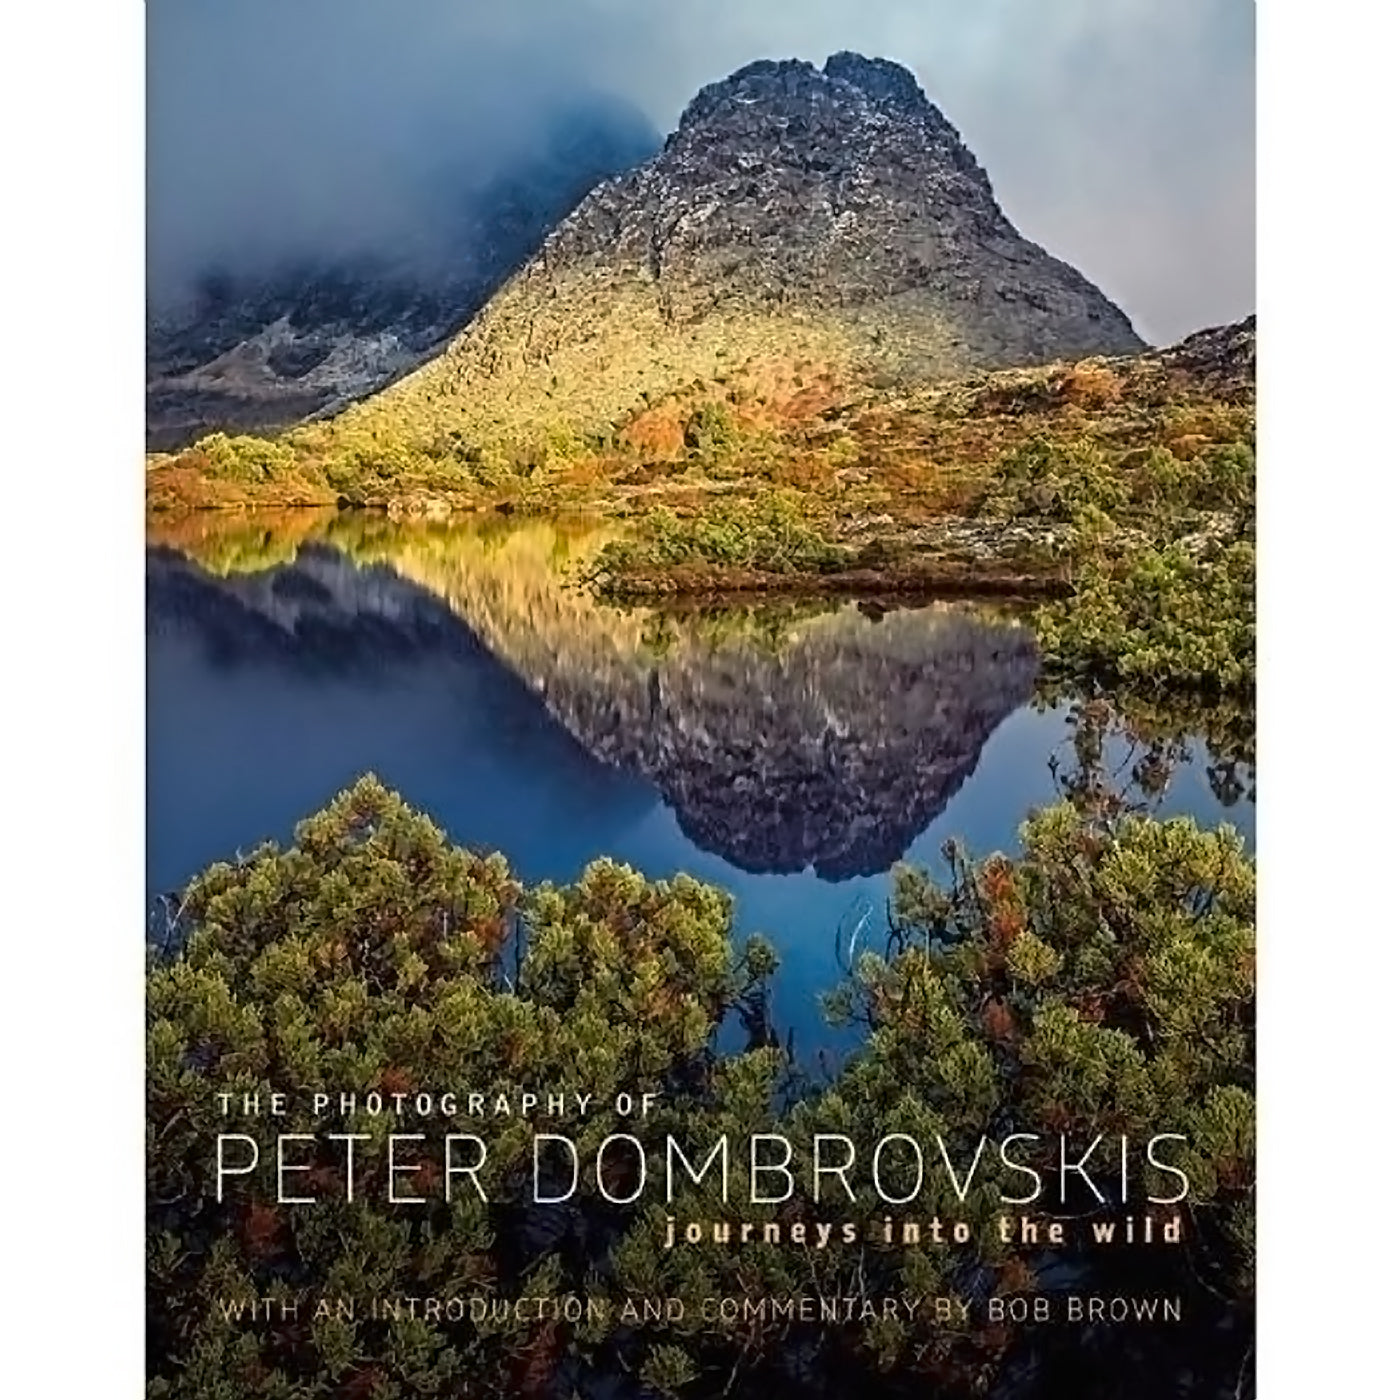 The Photography of Peter Dombrovskis: Journeys Into the Wild